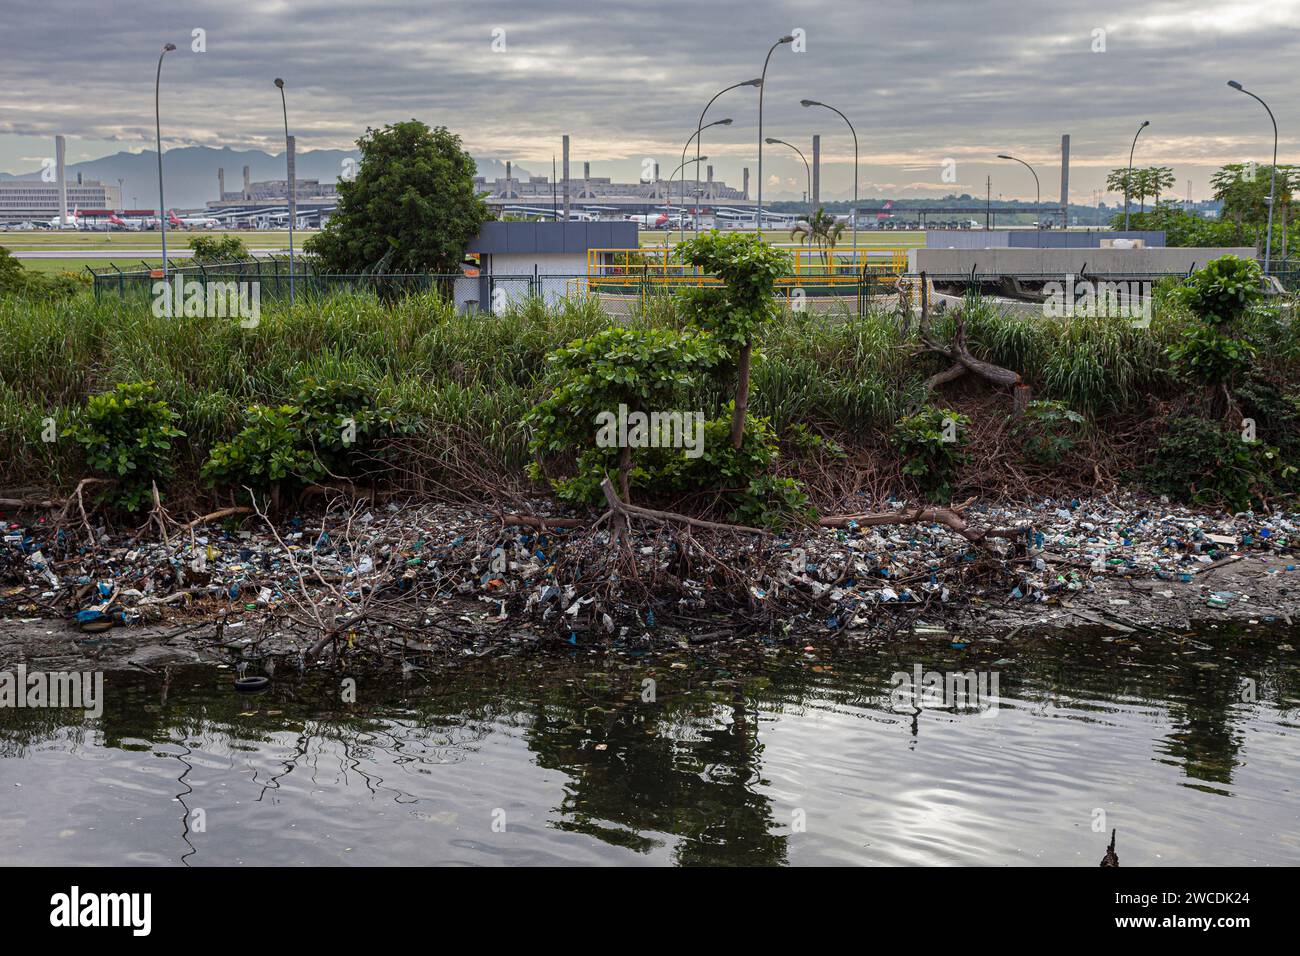 Plastic pollution in Guanabara Bay, litter, waste products discarded incorrectly, without consent, at an unsuitable location beside Rio de Janeiro international airport. Stock Photo